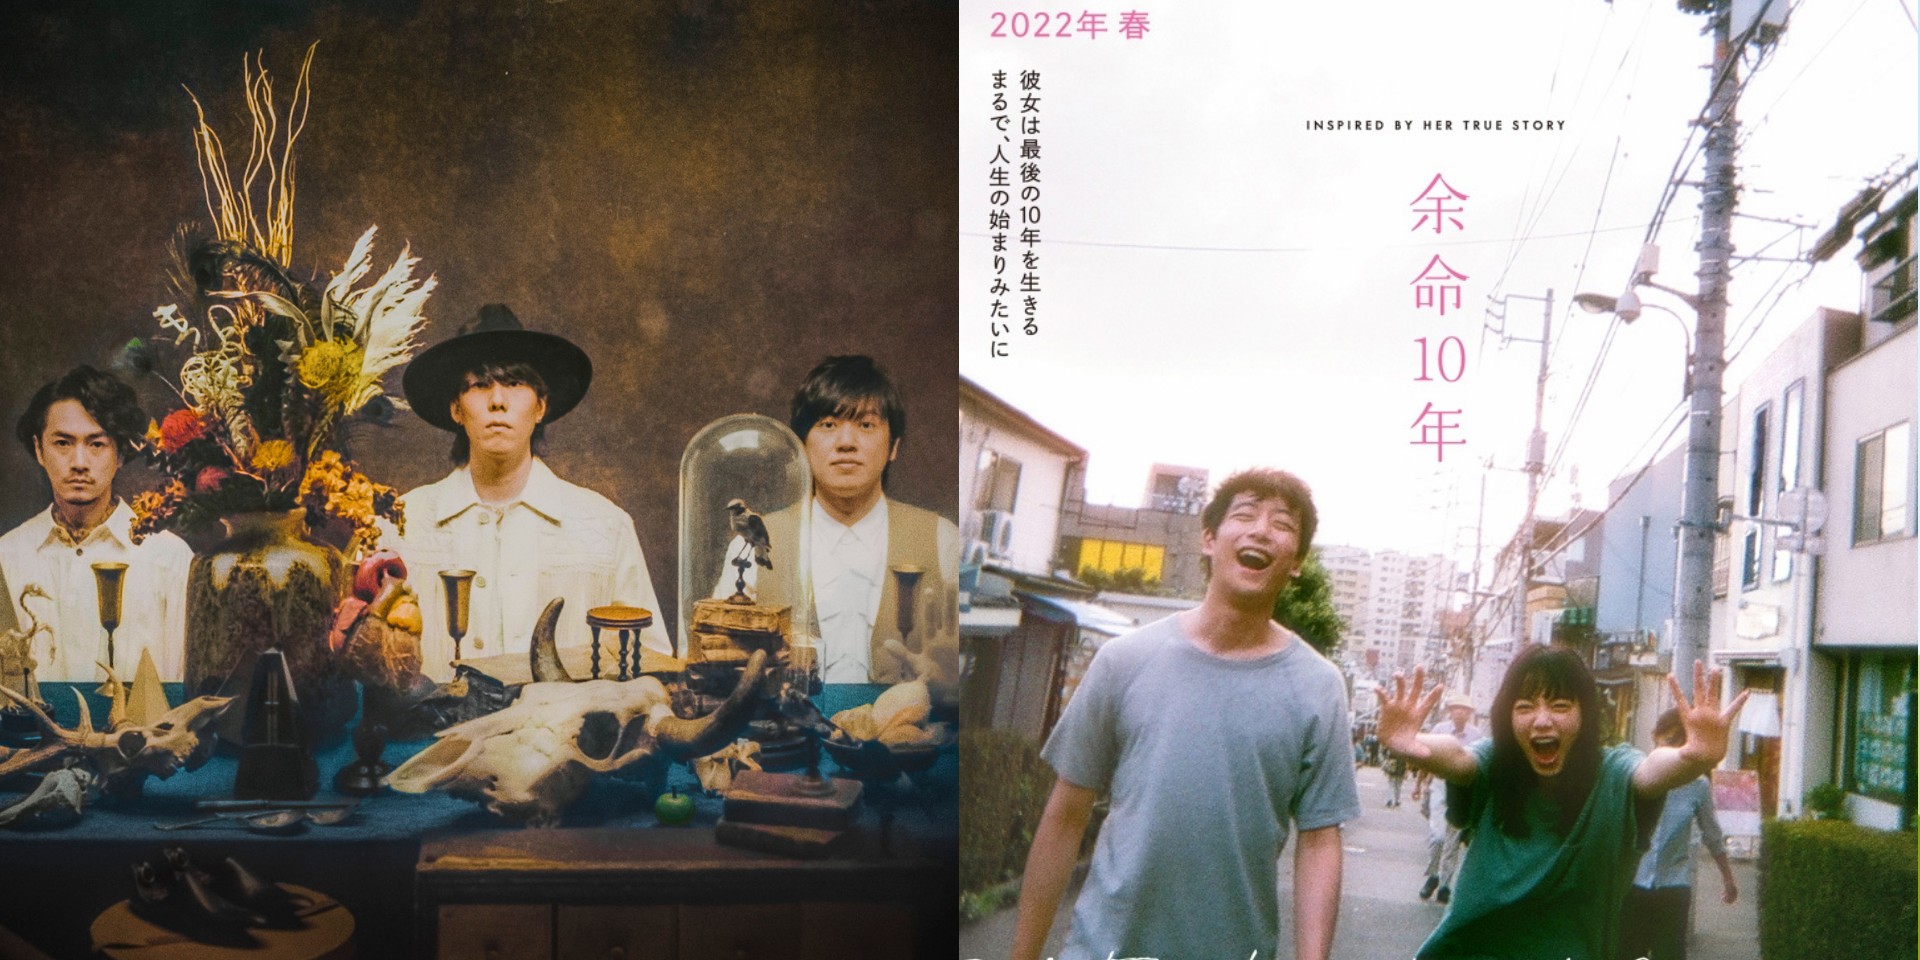 RADWIMPS release soundtrack for Japanese film ‘The Last 10 Years’: “I was still in tears as I watched it on screen” 
